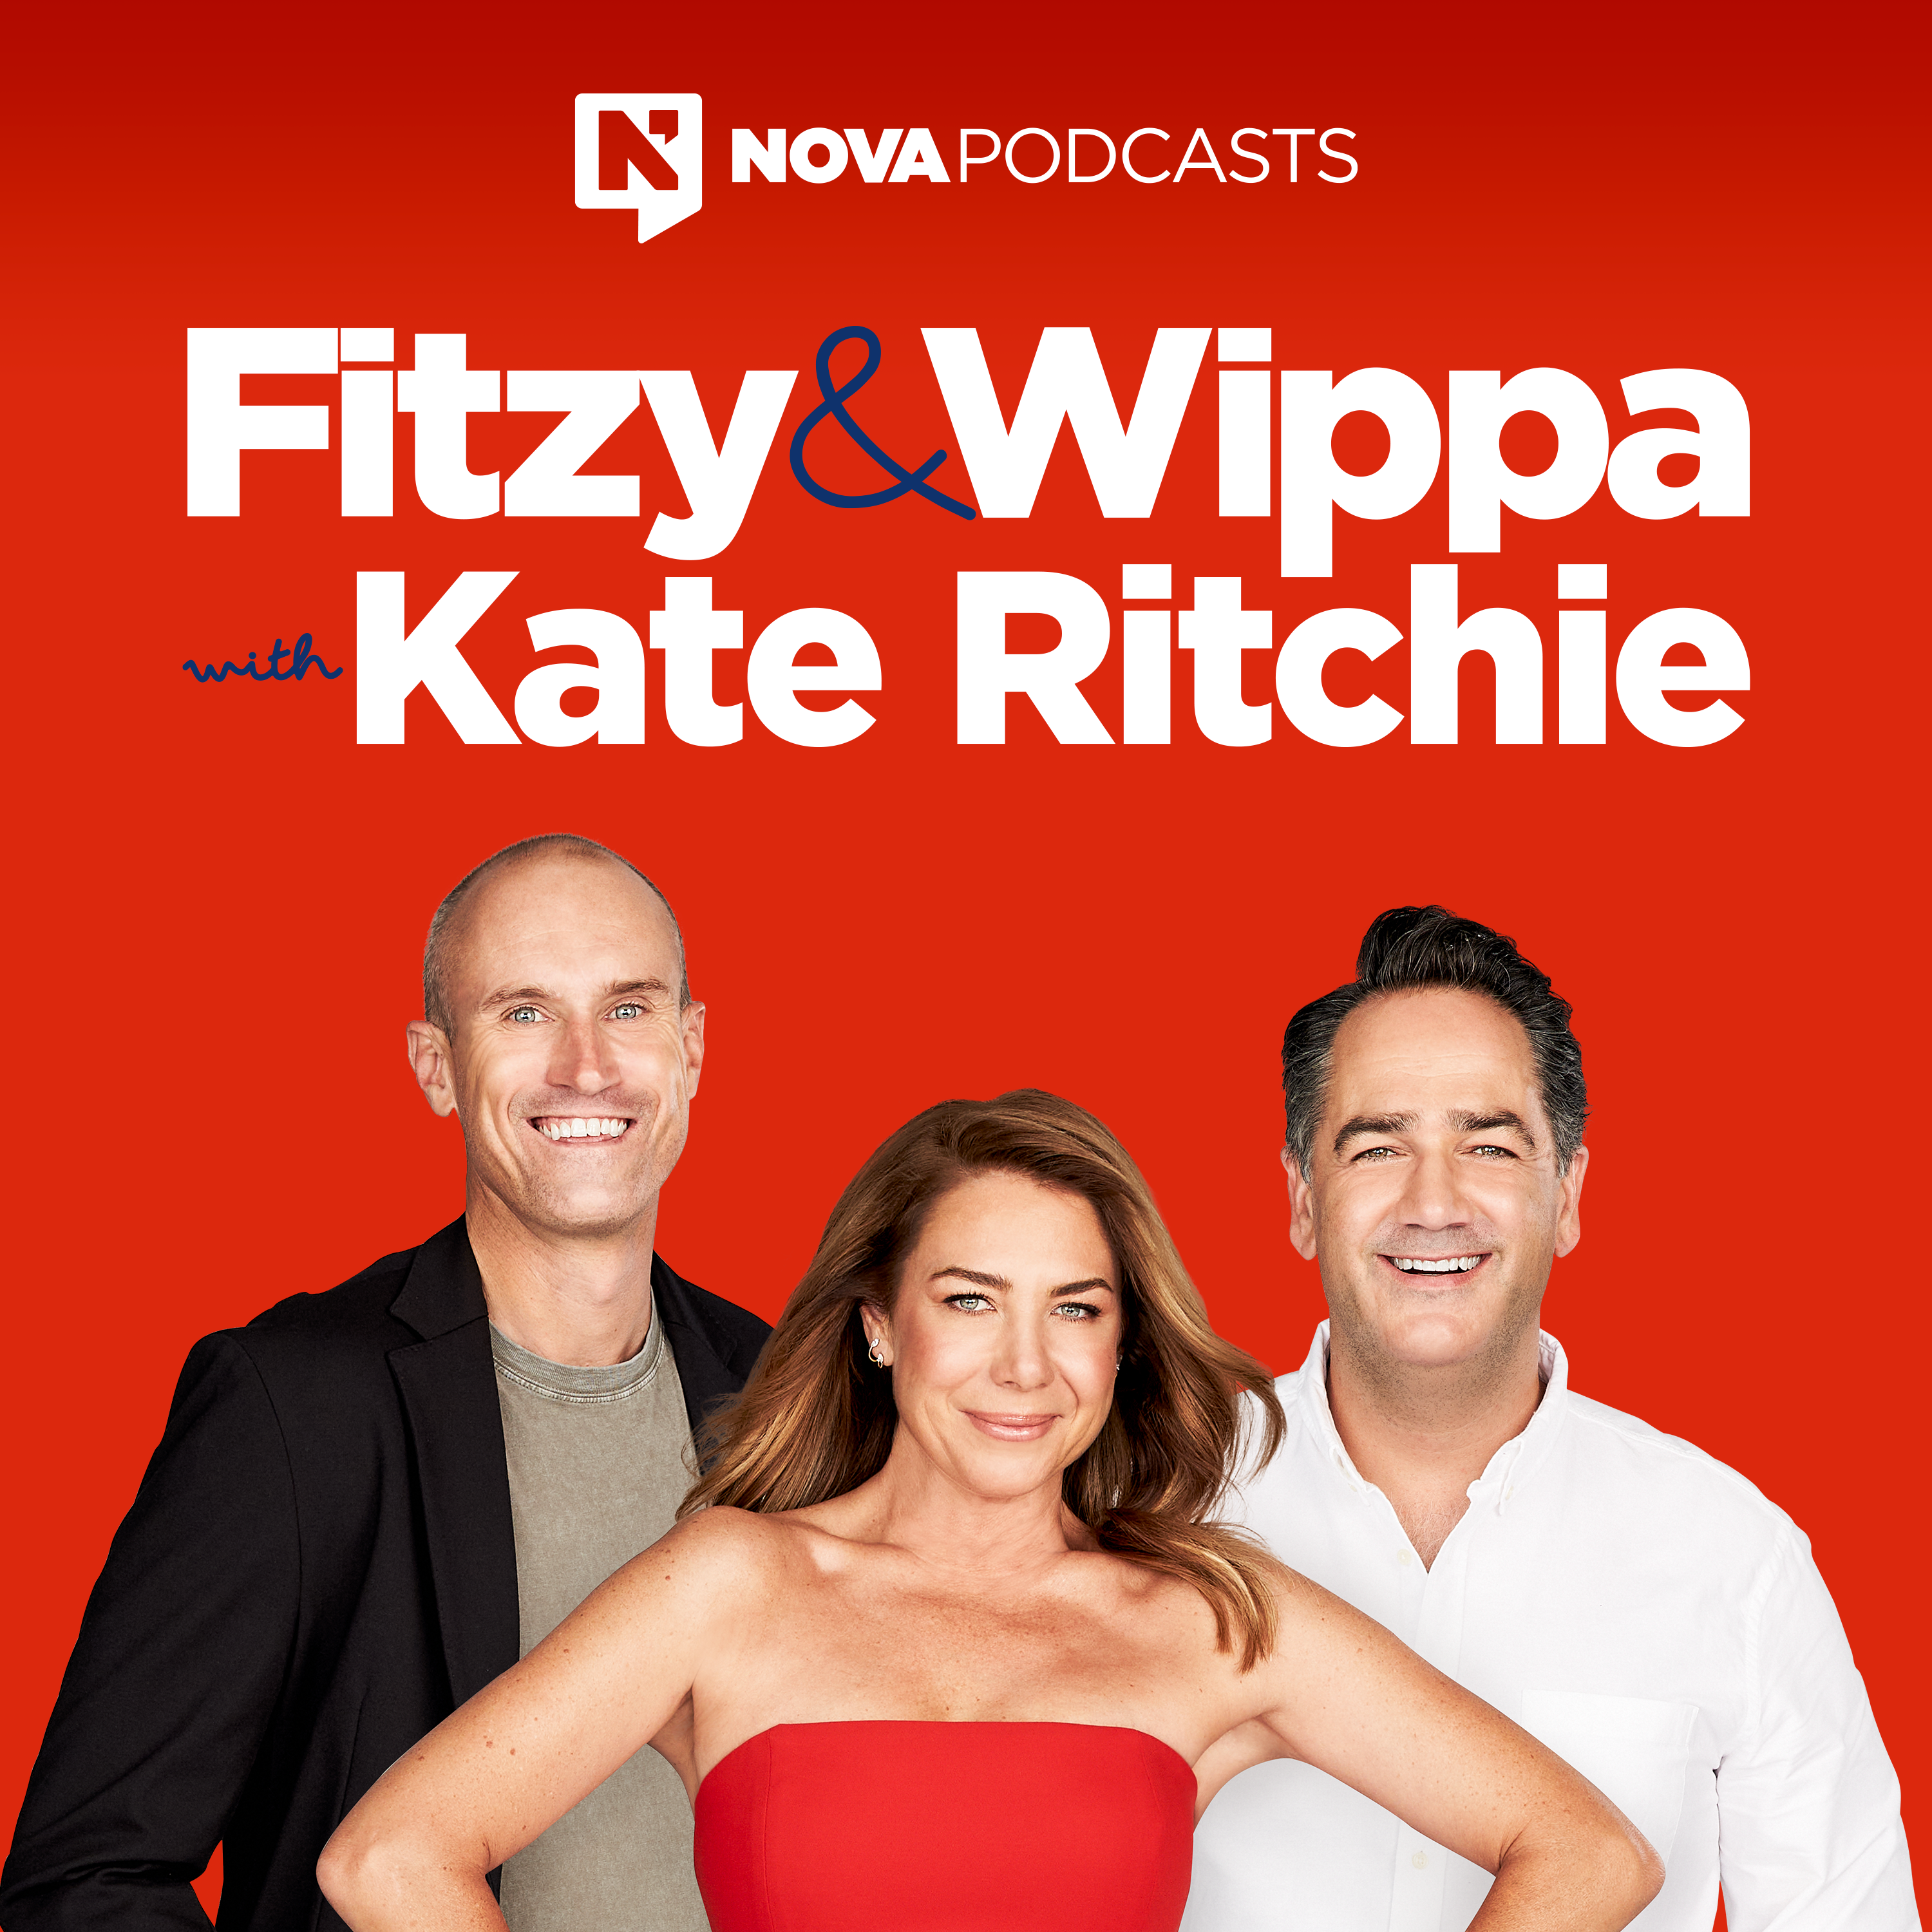 Why Did Wippa’s Date Burst Into Tears Once They Got Back To His?